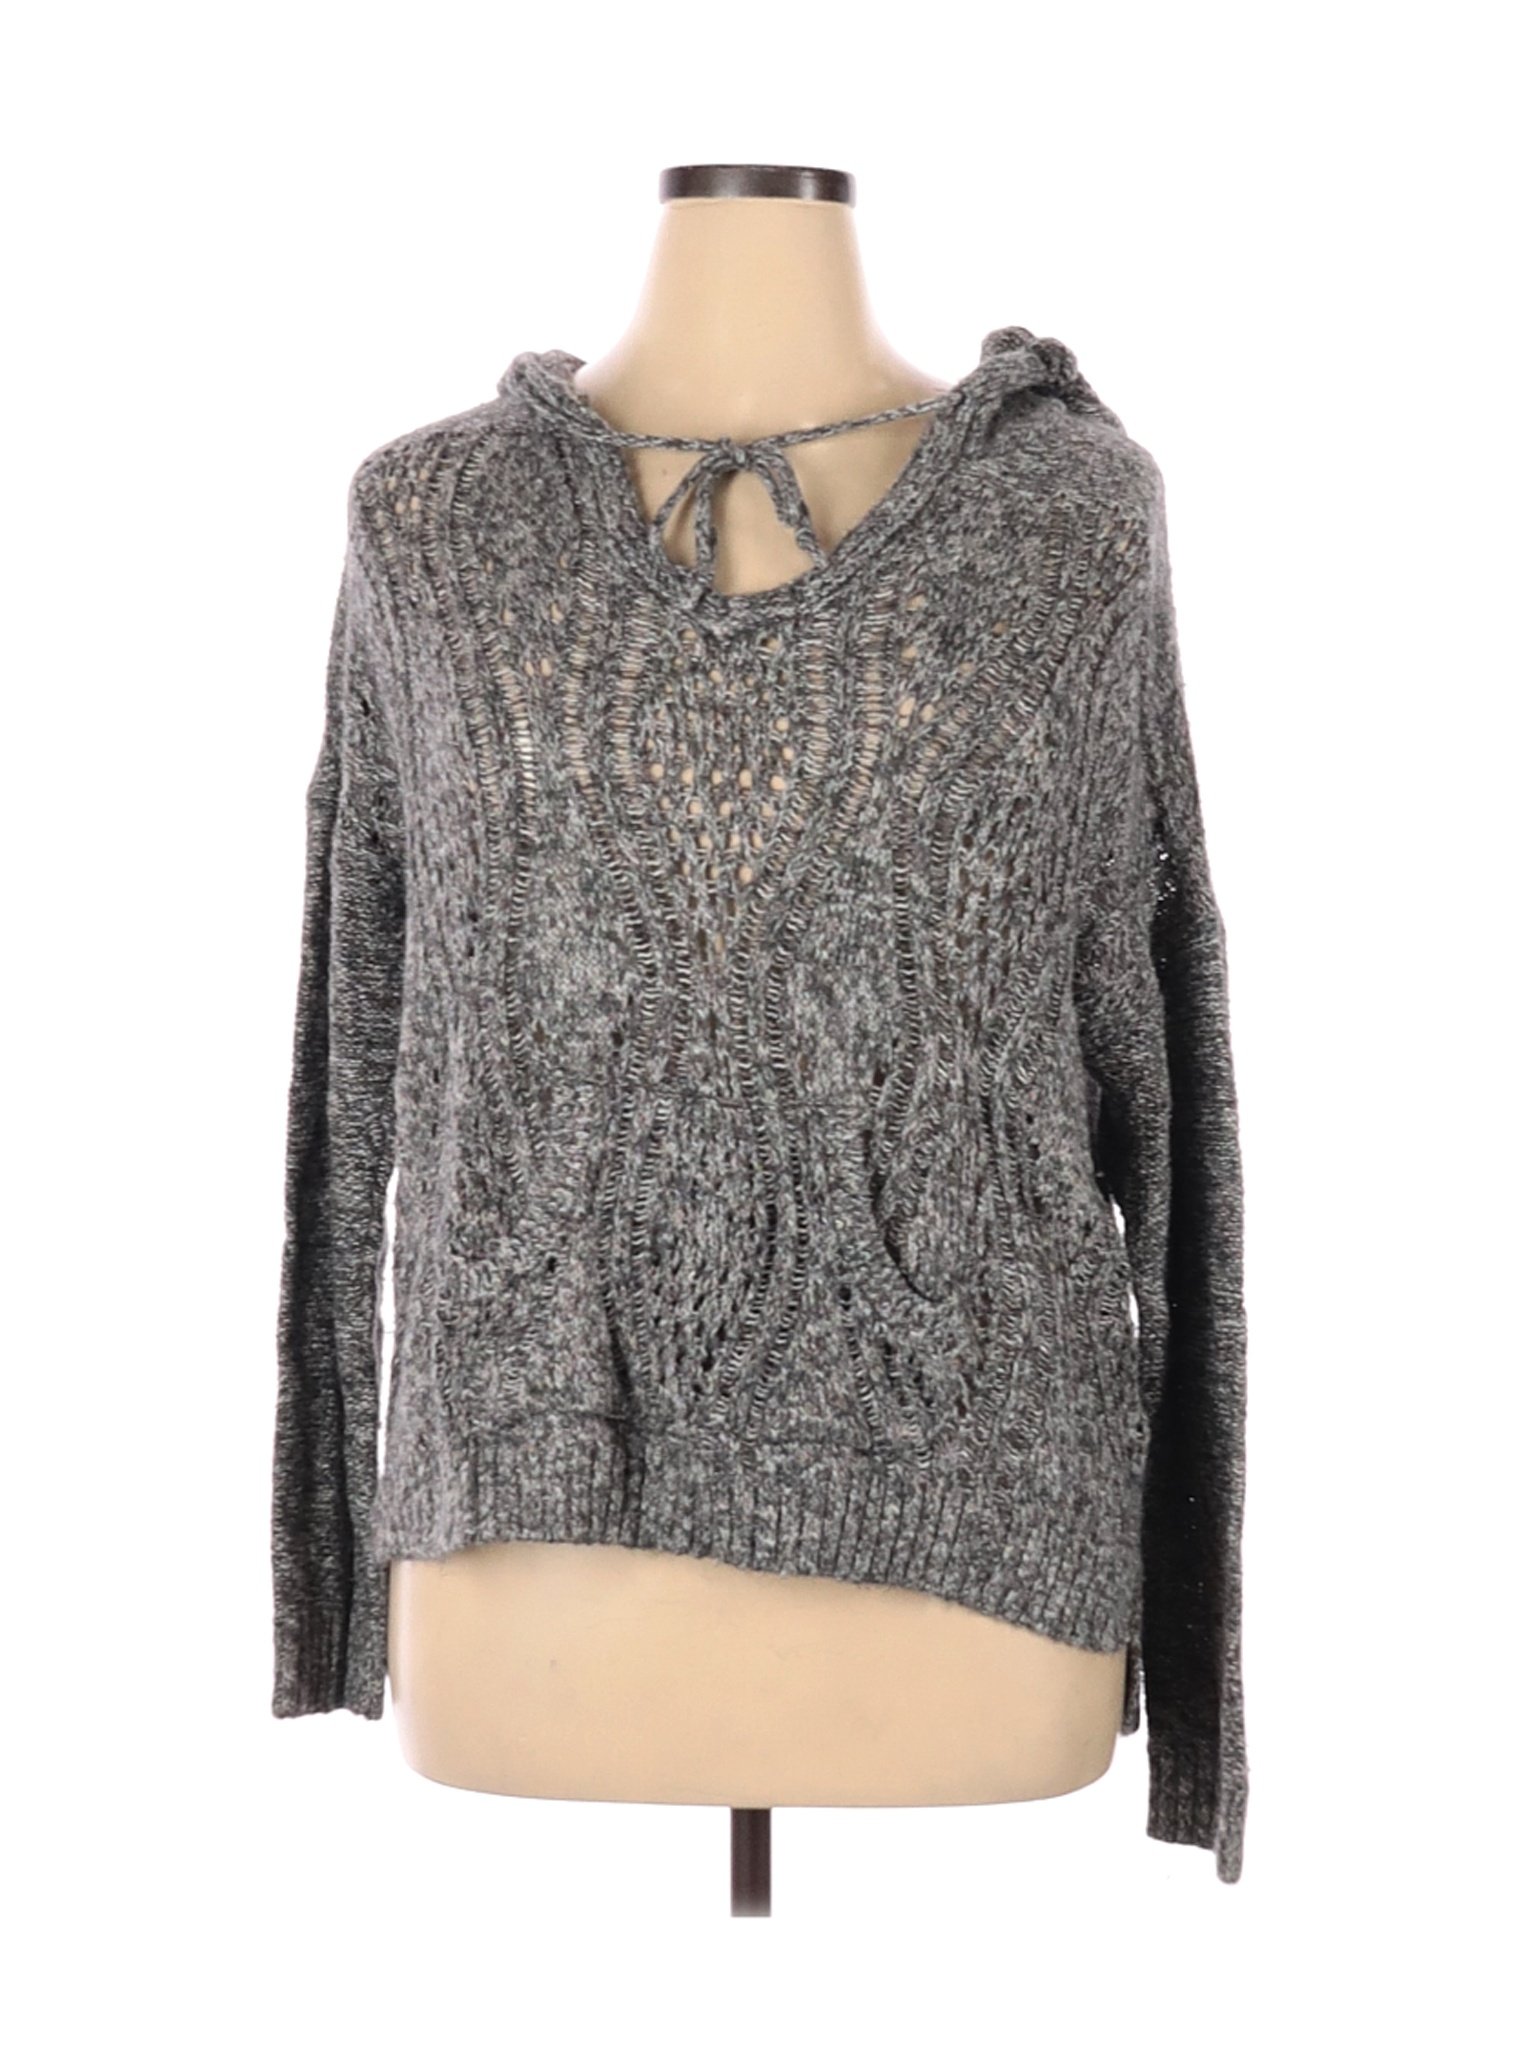 Maurices Women Gray Pullover Hoodie XL | eBay